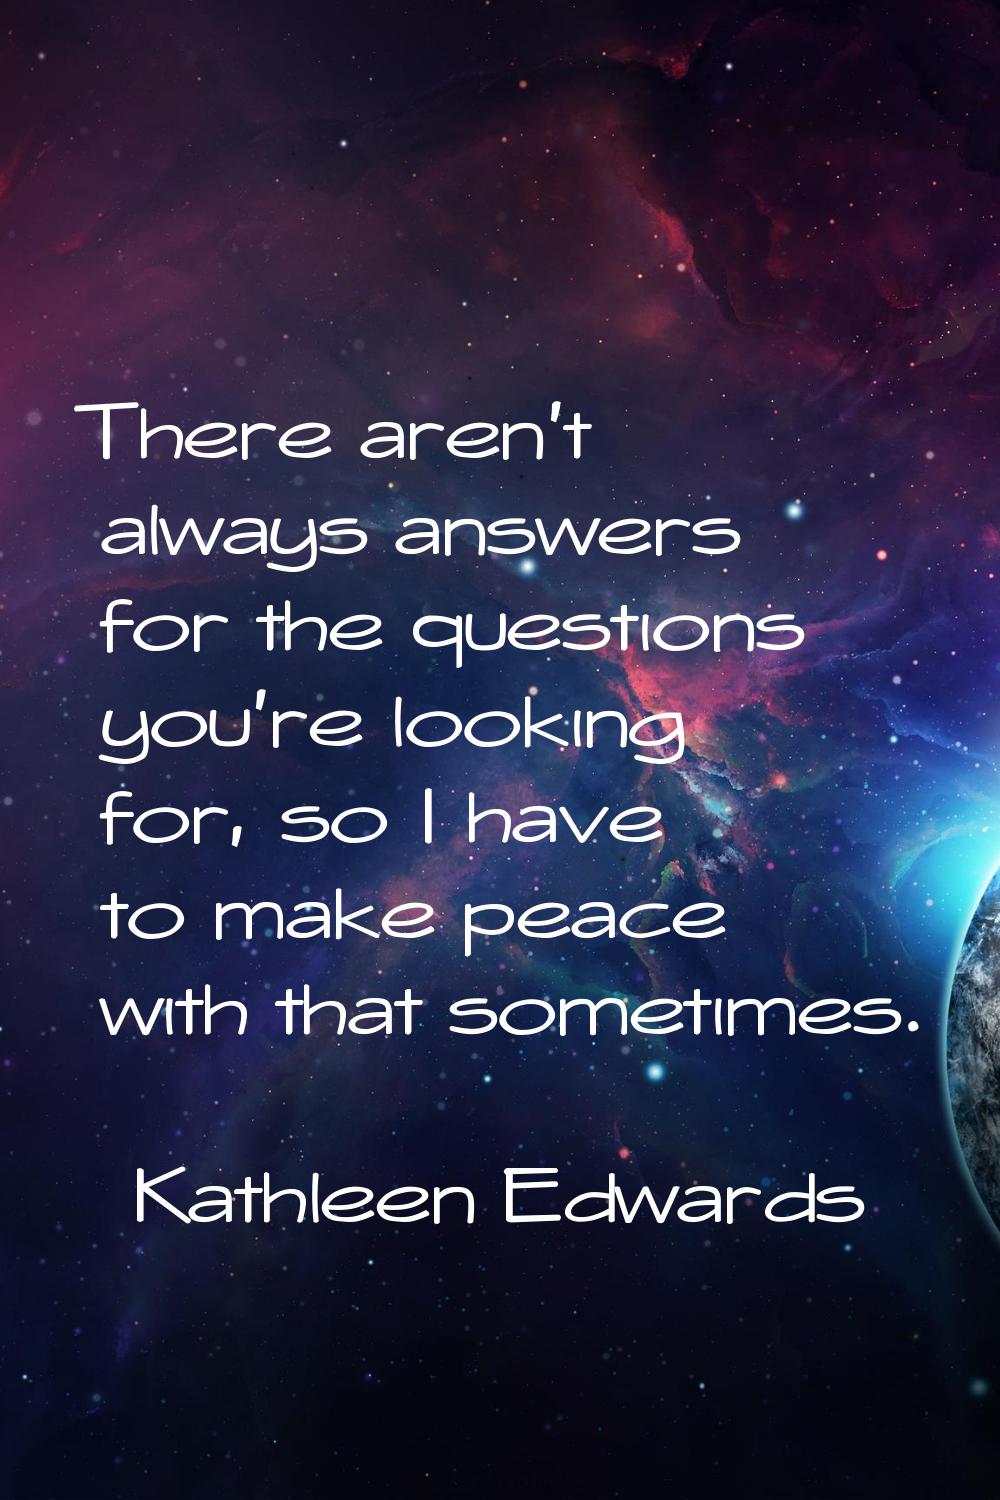 There aren't always answers for the questions you're looking for, so I have to make peace with that